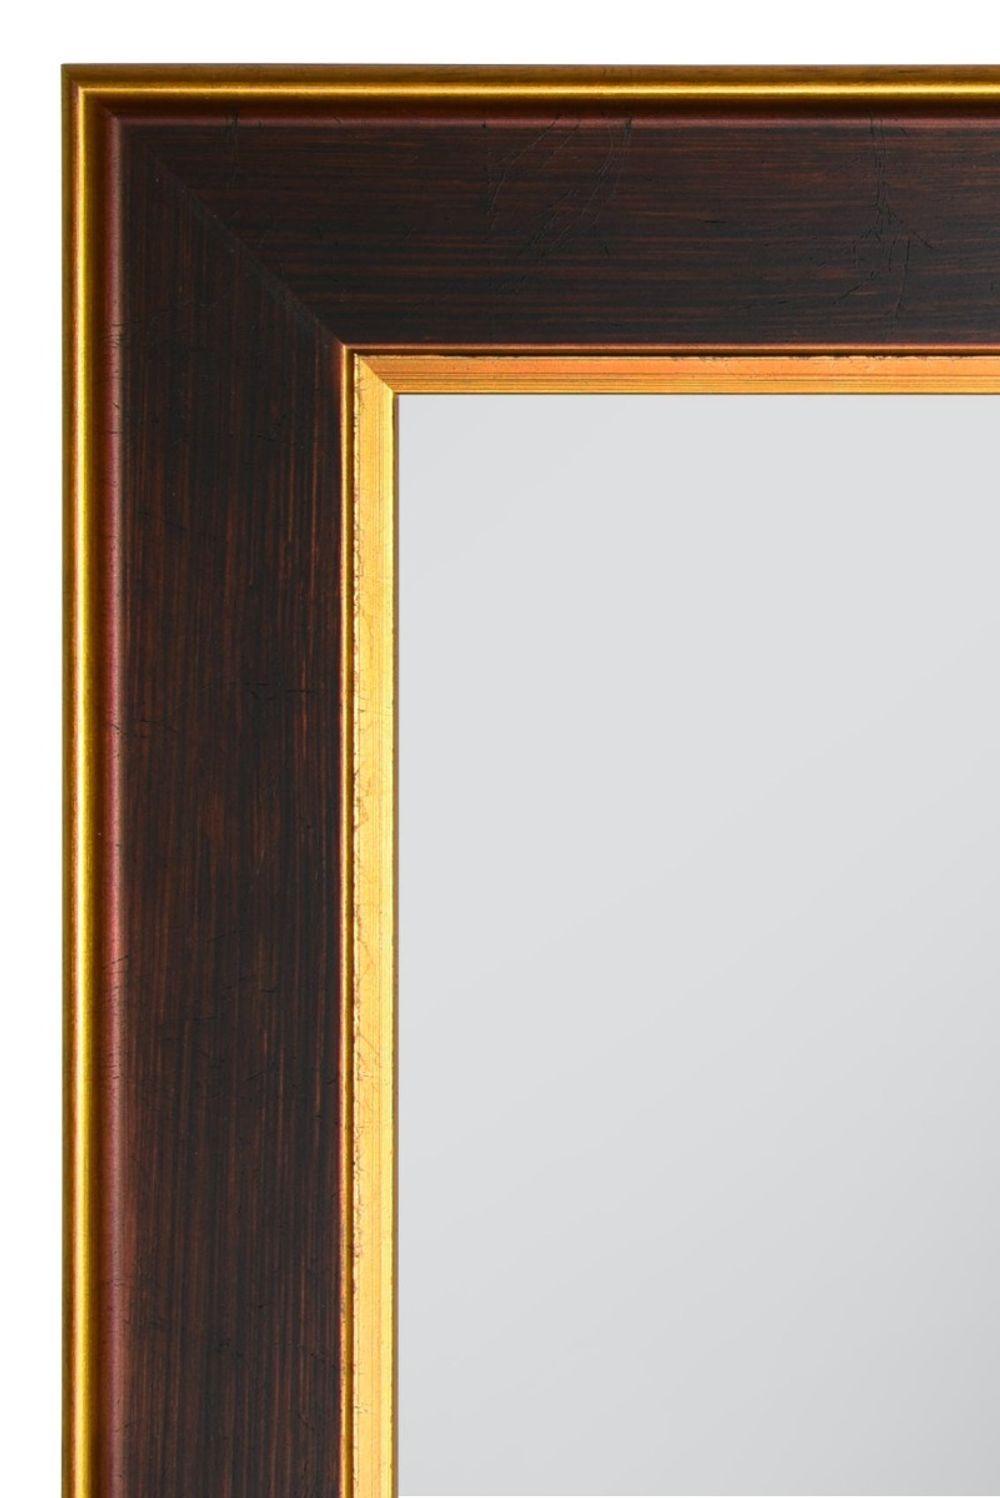 LANCASTER EXTRA LARGE WALL HANGING MIRROR - Lilpins Essentials